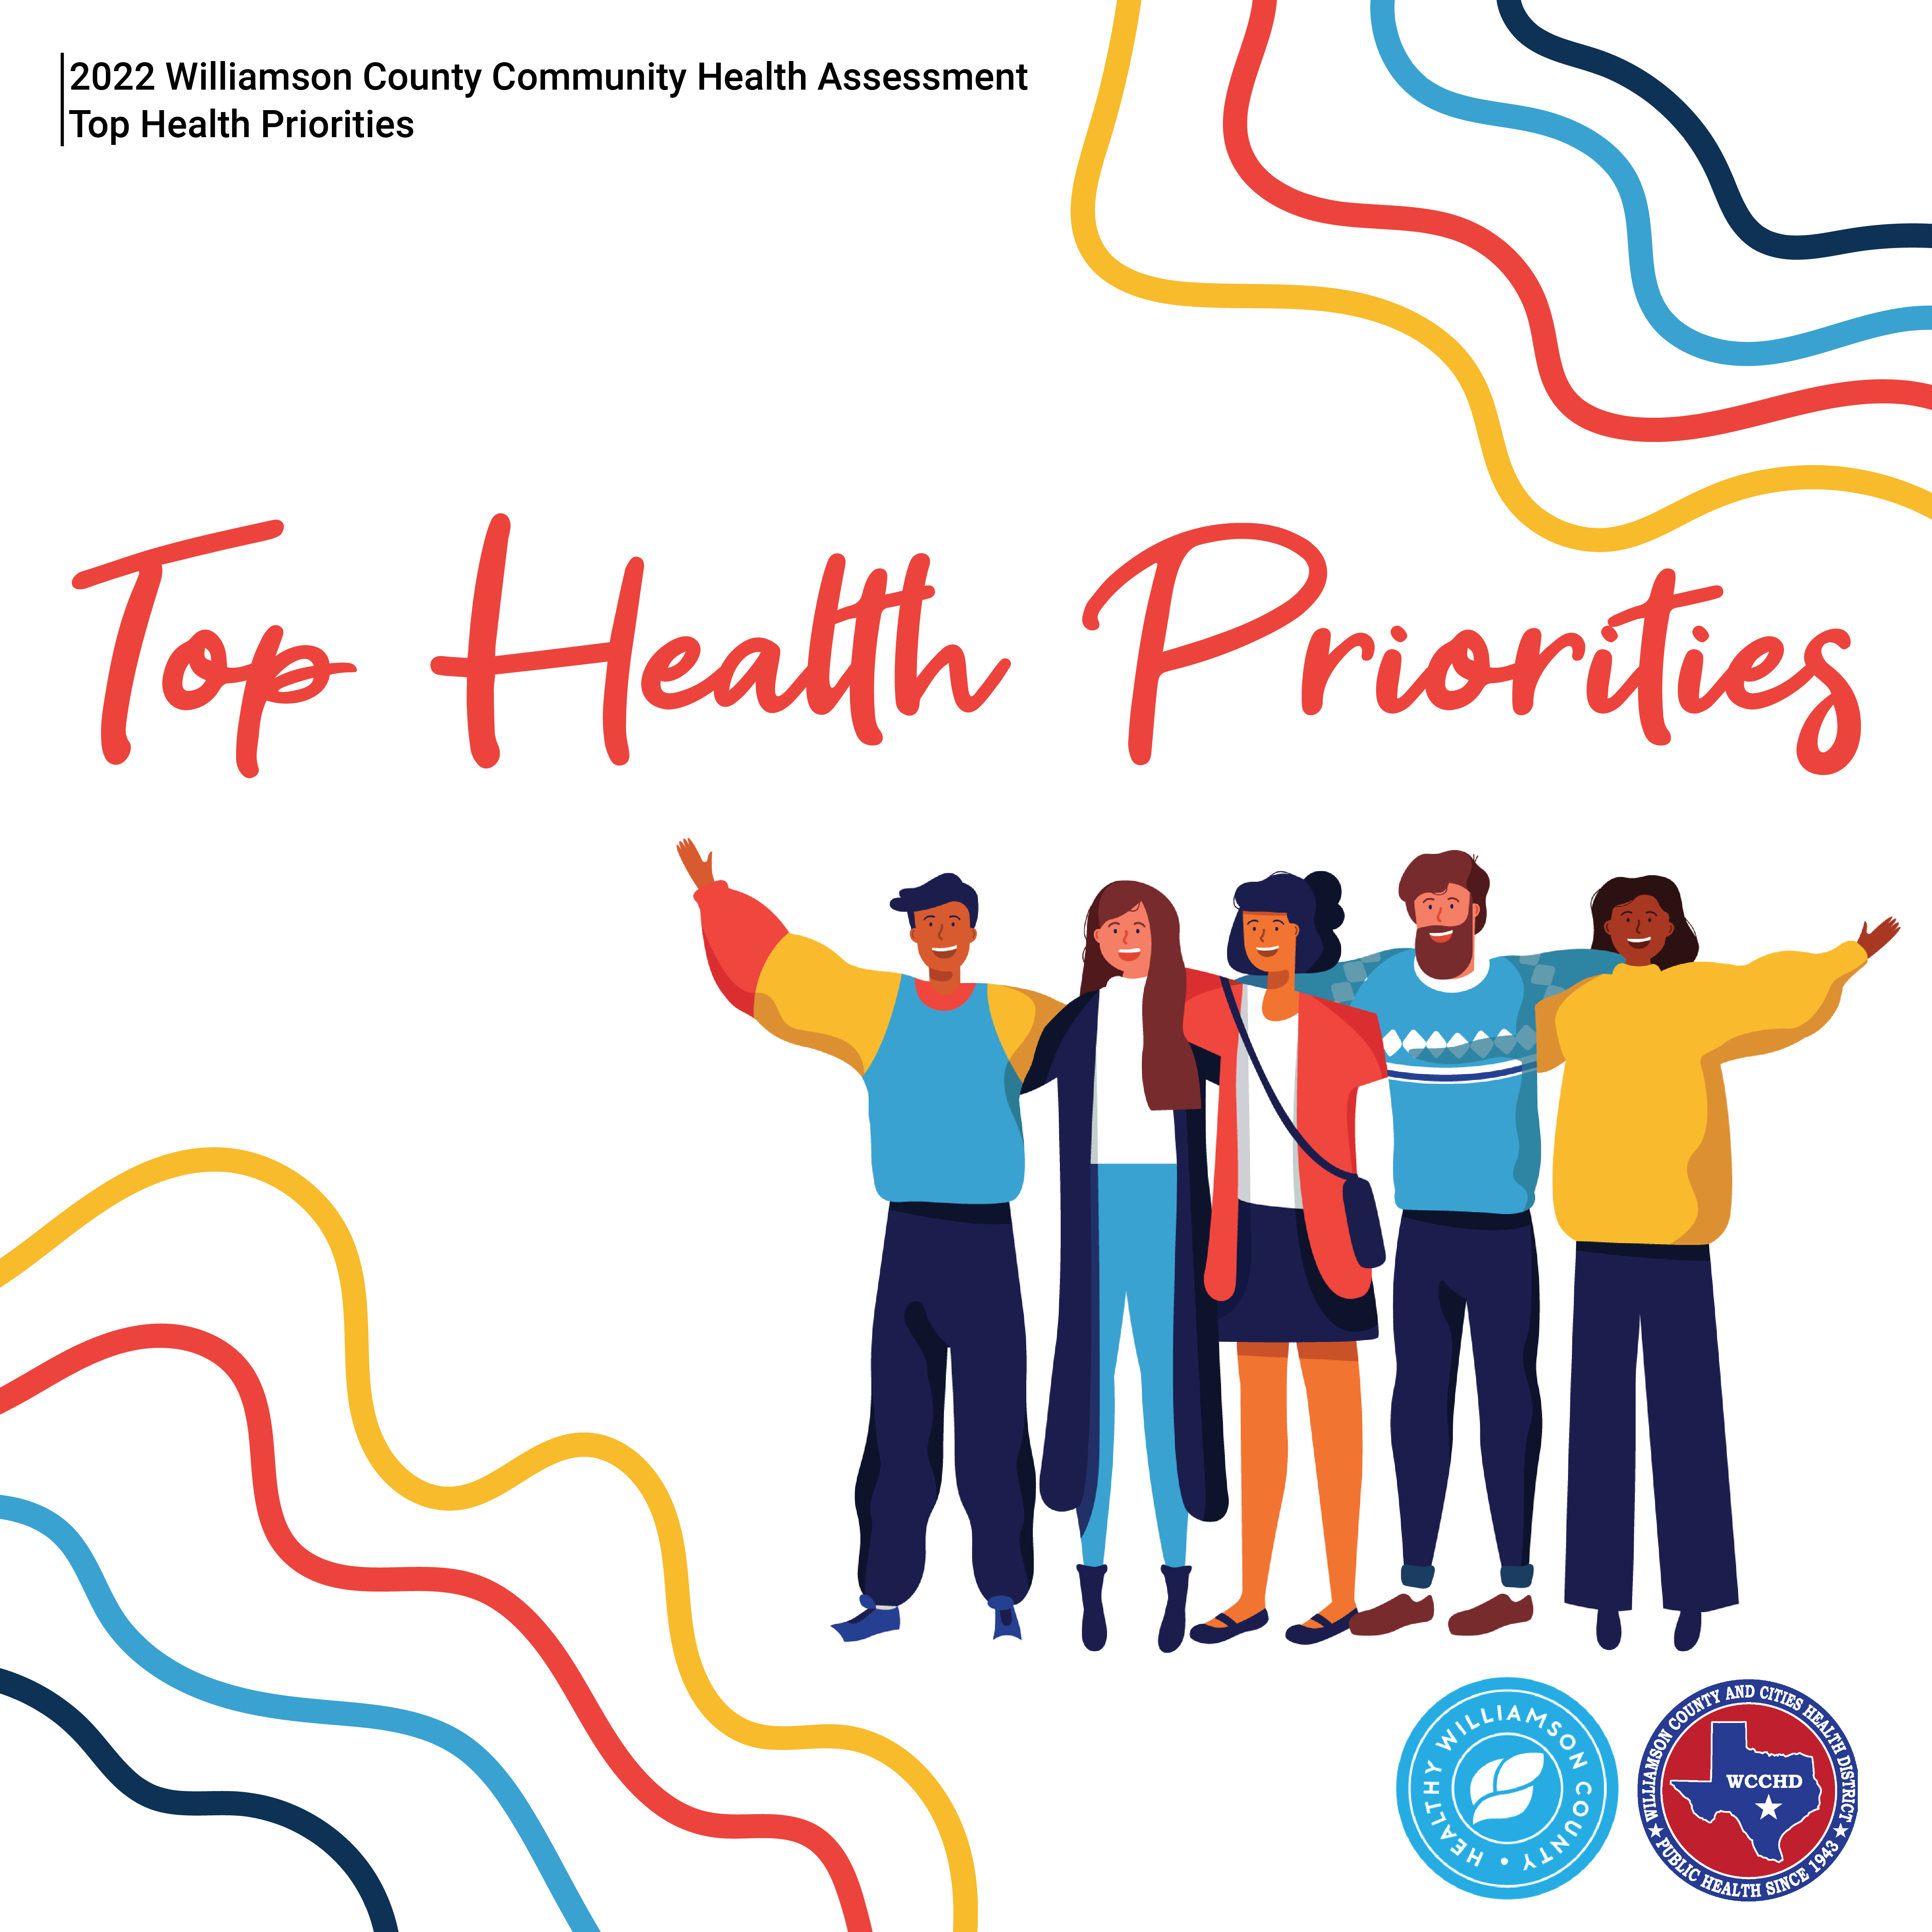 2022 Williamson County Community Health Assessment. Top Health Priorities. Illustration of five people with their arms on each other's shoulders, smiling. Logos for Healthy Williamson County and Williamson County and Cities Health District.